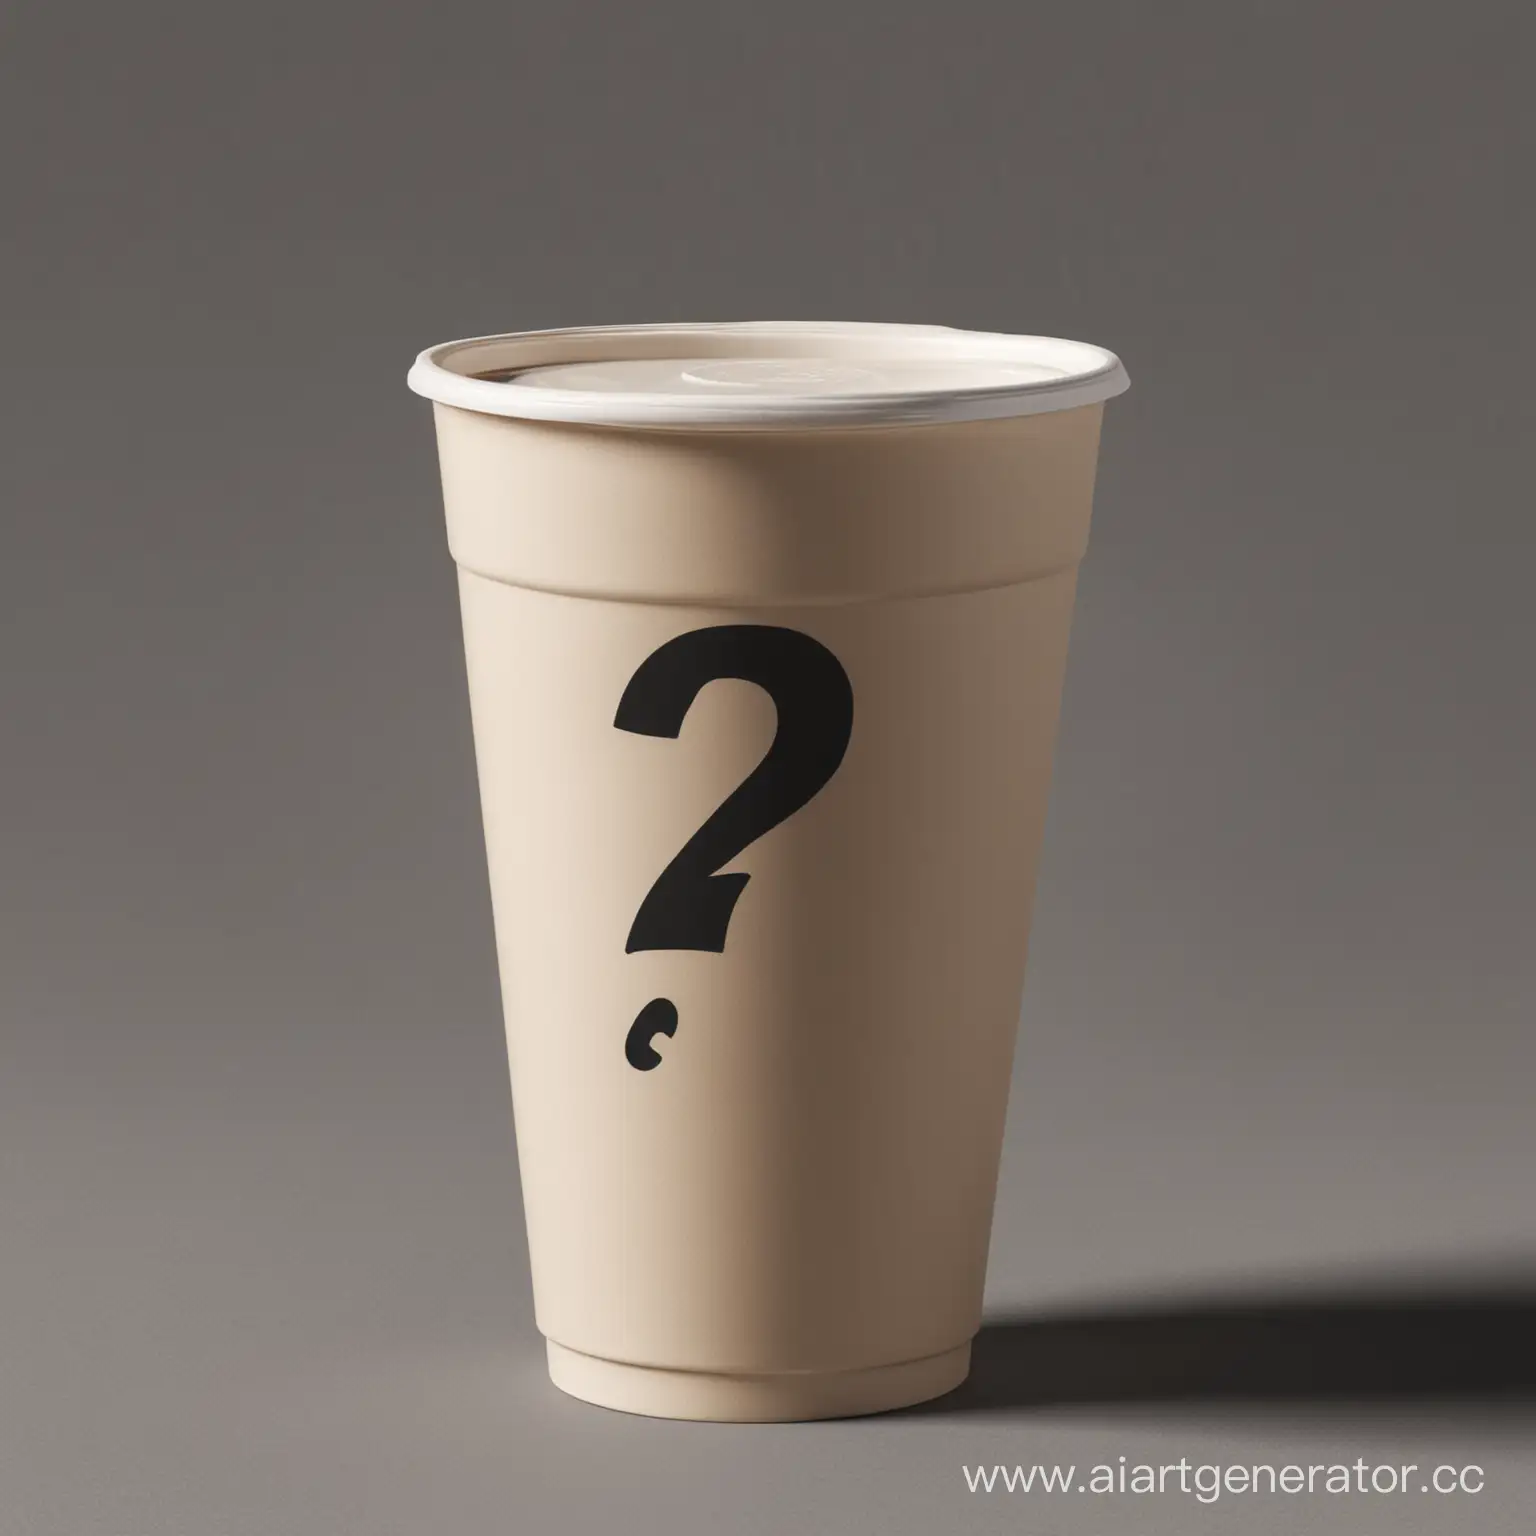 Mysterious-750ml-Drink-Package-with-Question-Mark-Design